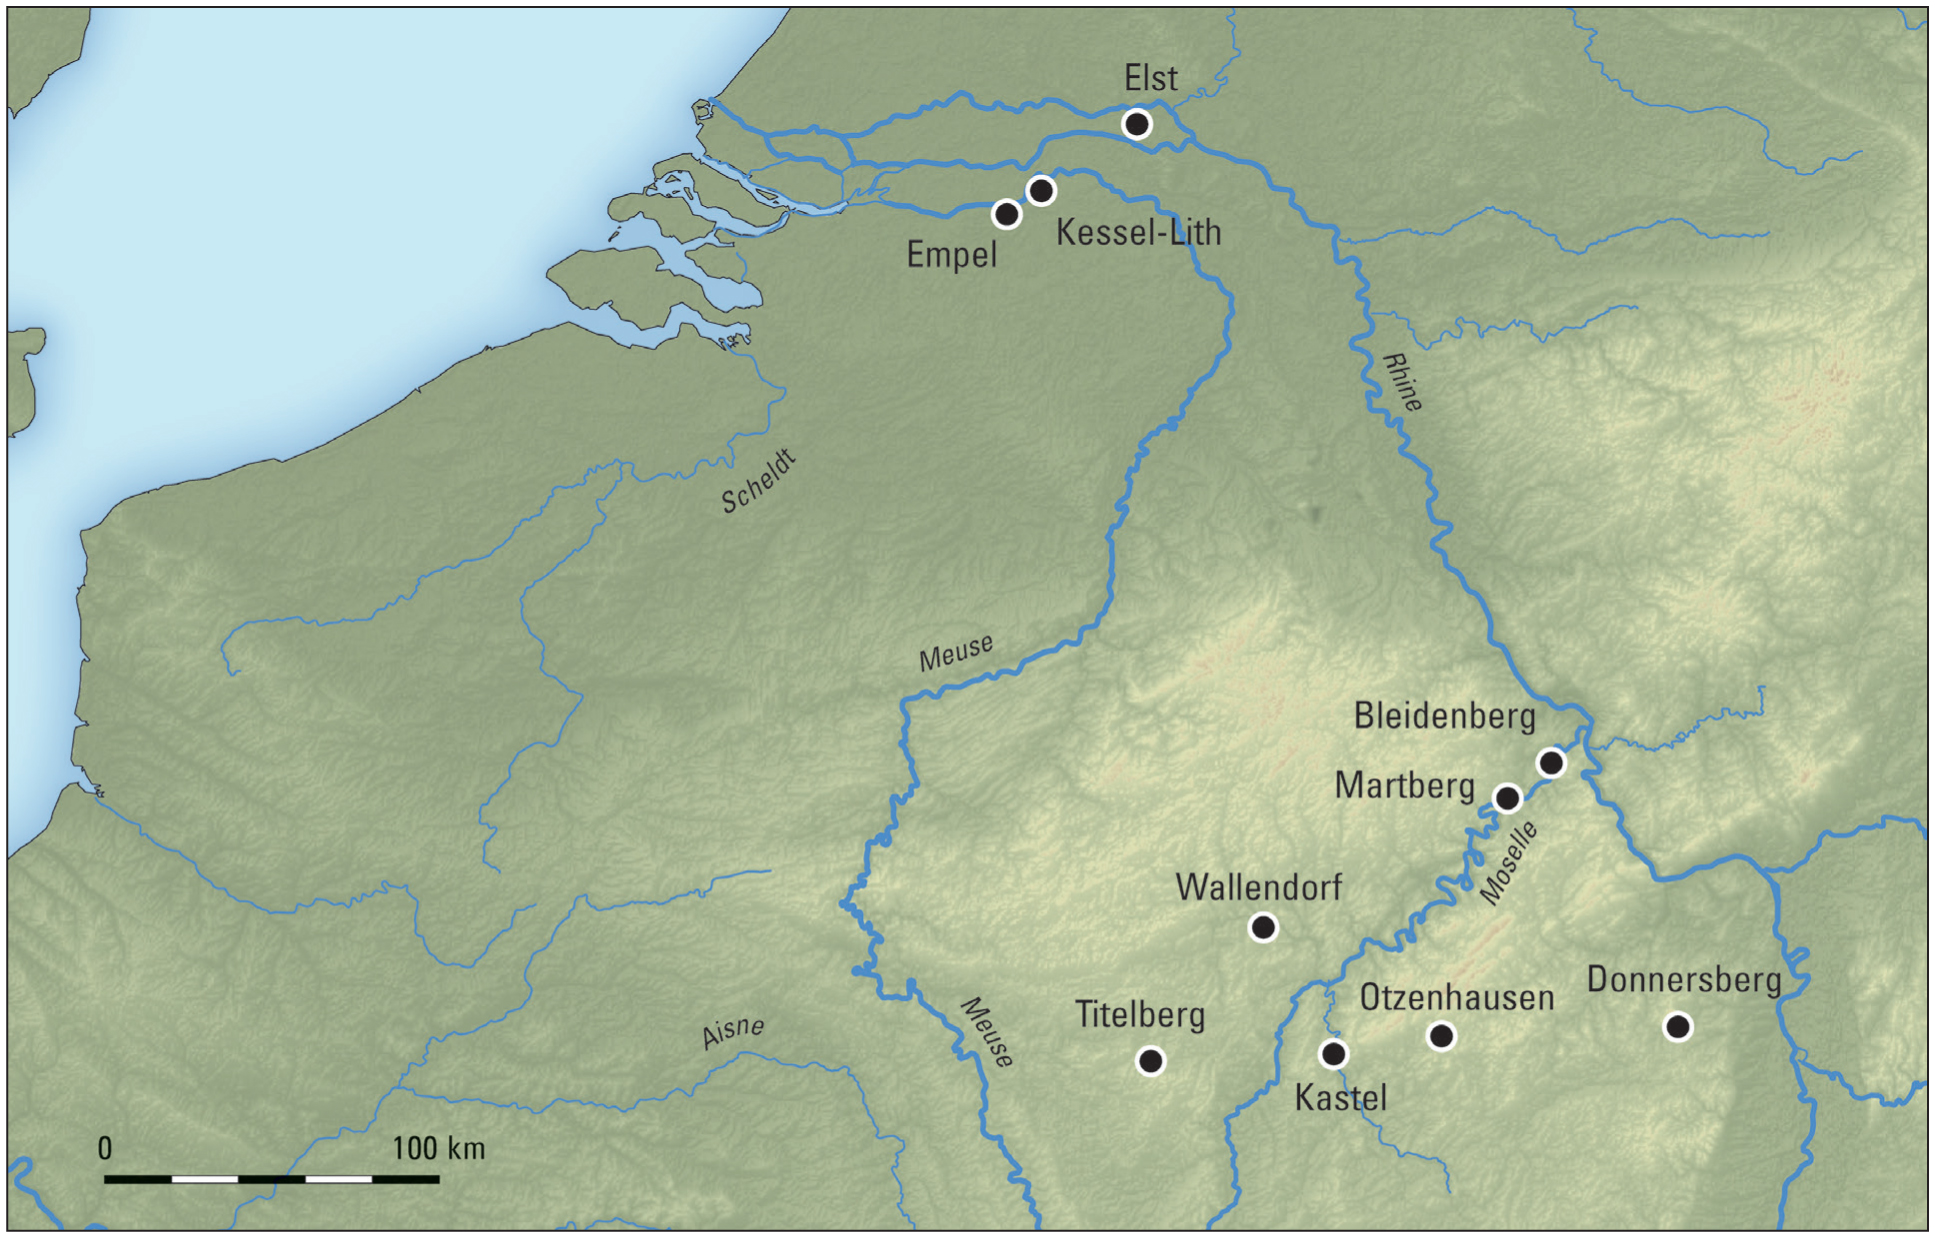 The Politics of Identity: Late Iron Age Sanctuaries in the Rhineland